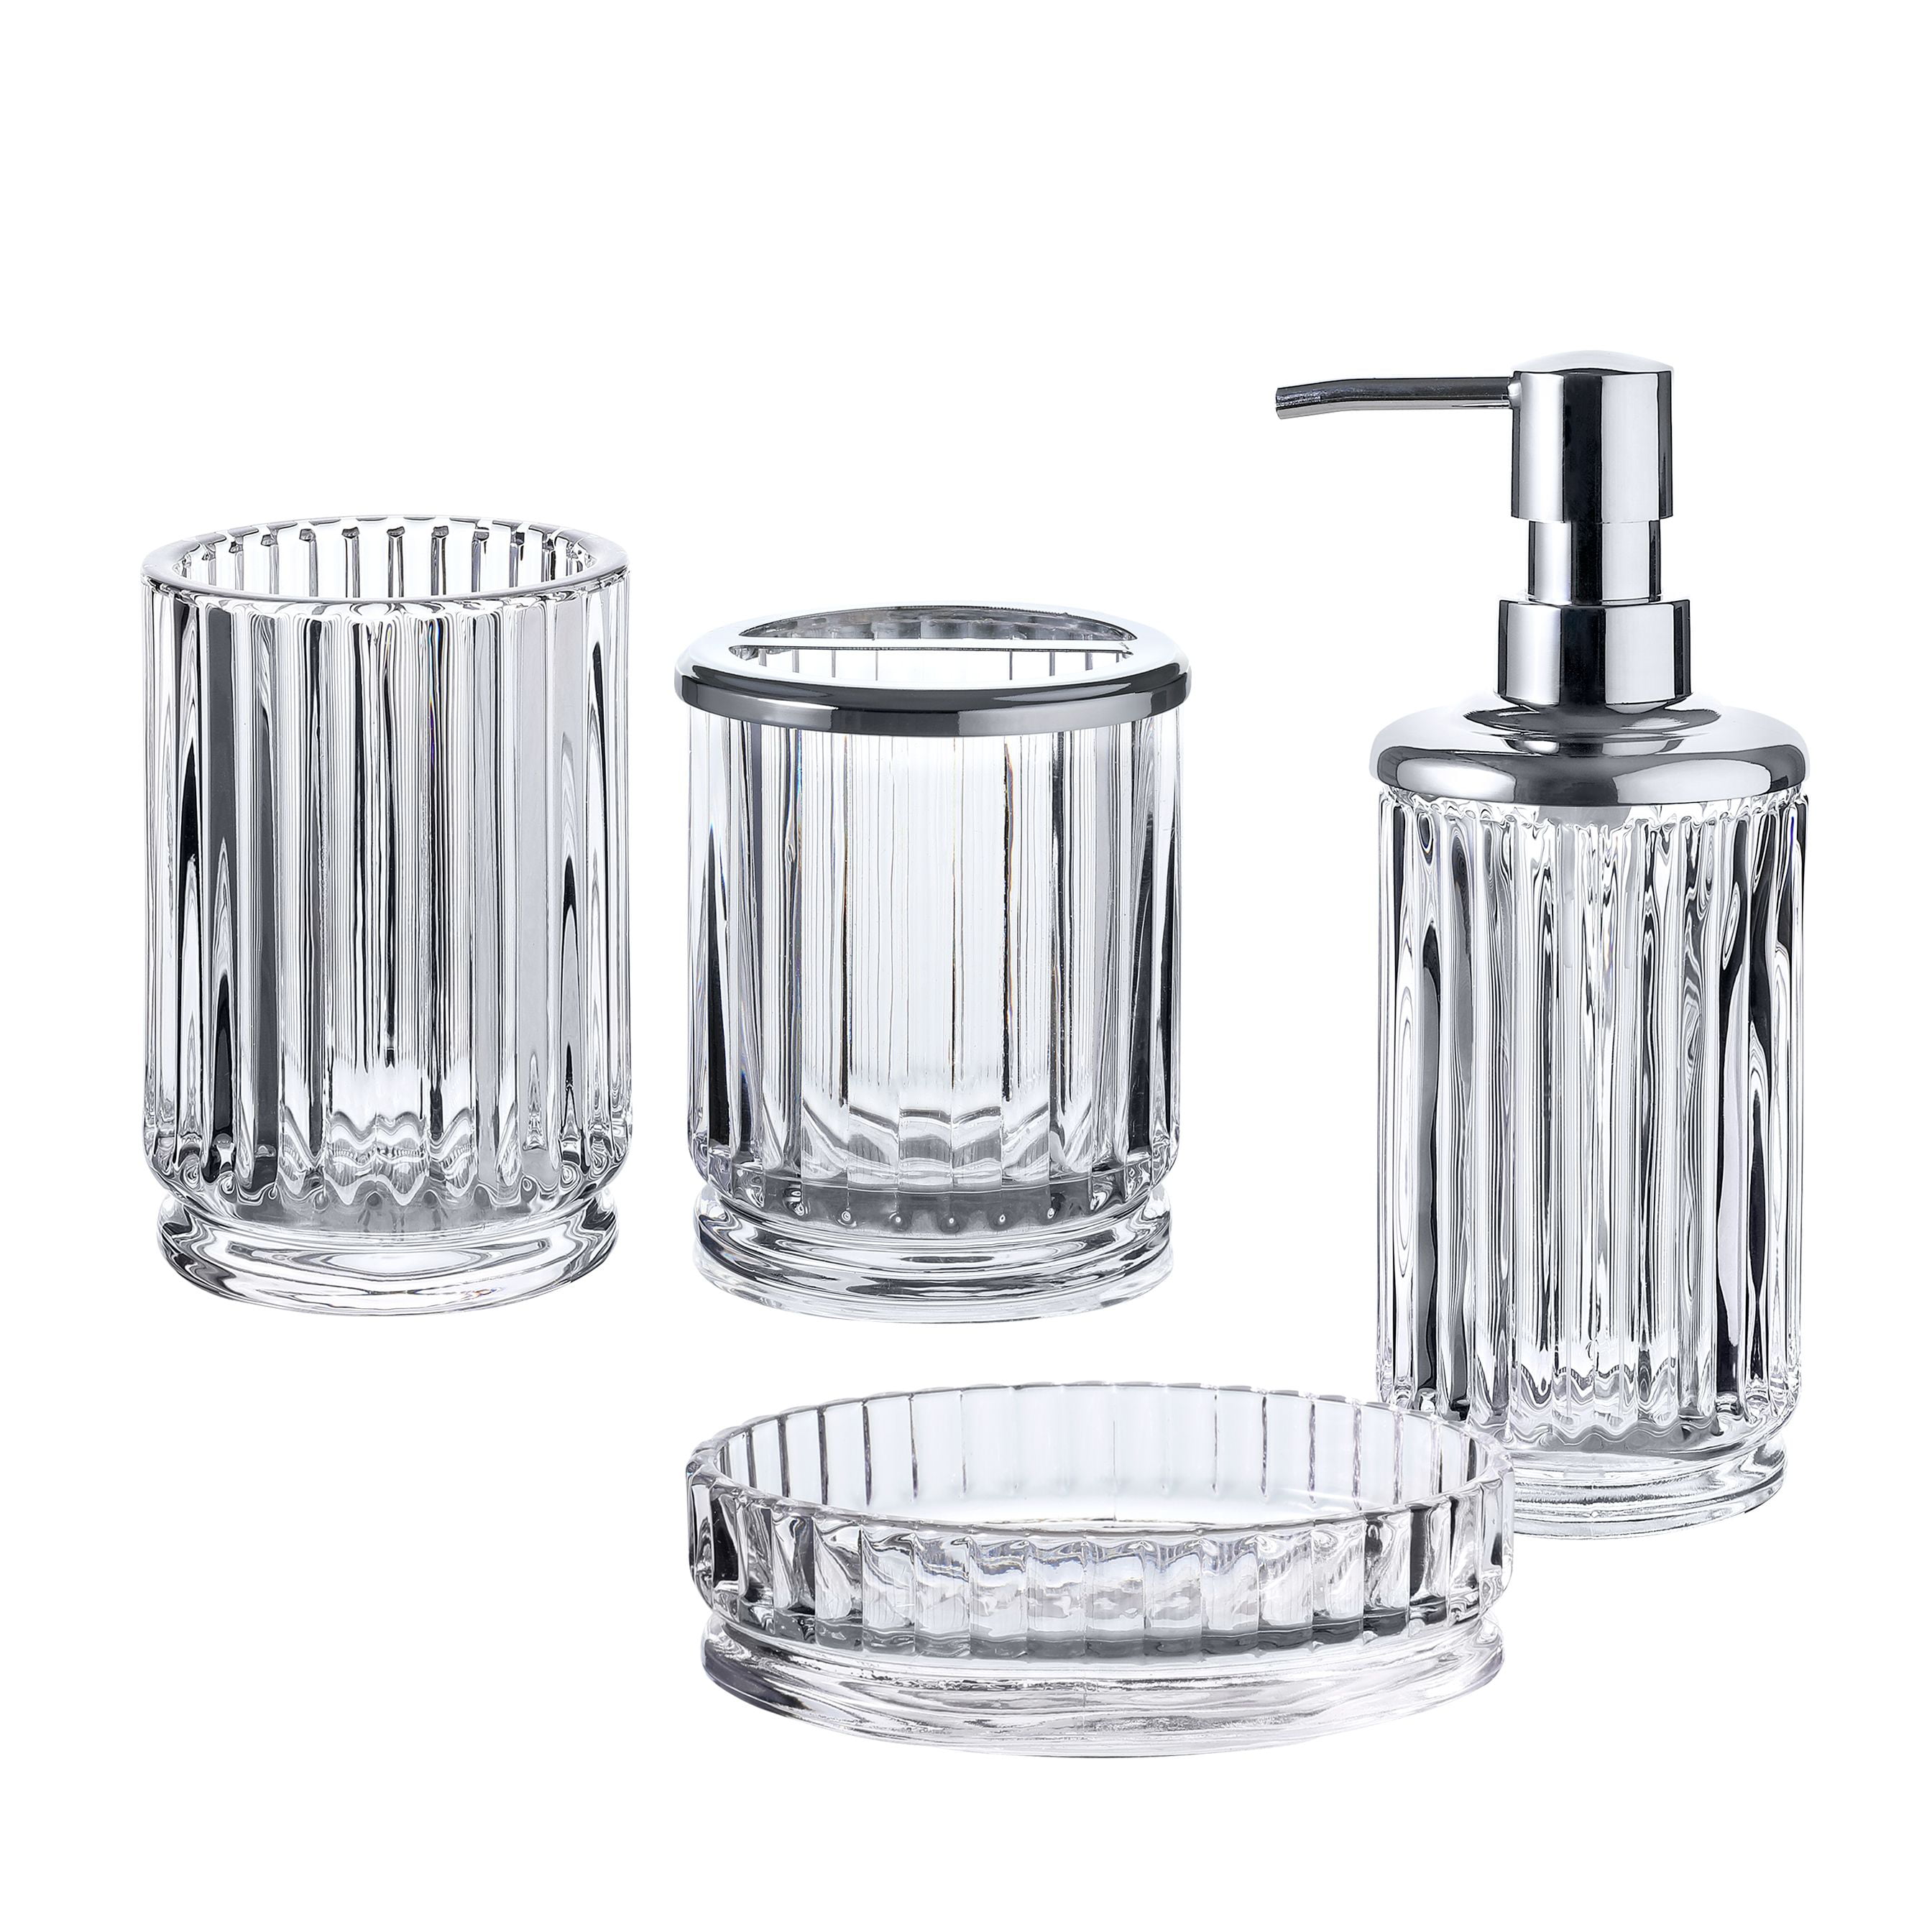 4 Piece Bath Accessory Sets With Gold Soap Dispenser Tumbler And Ring Tray Mosaic Bathroom Accessories Set Toothbrush Holder